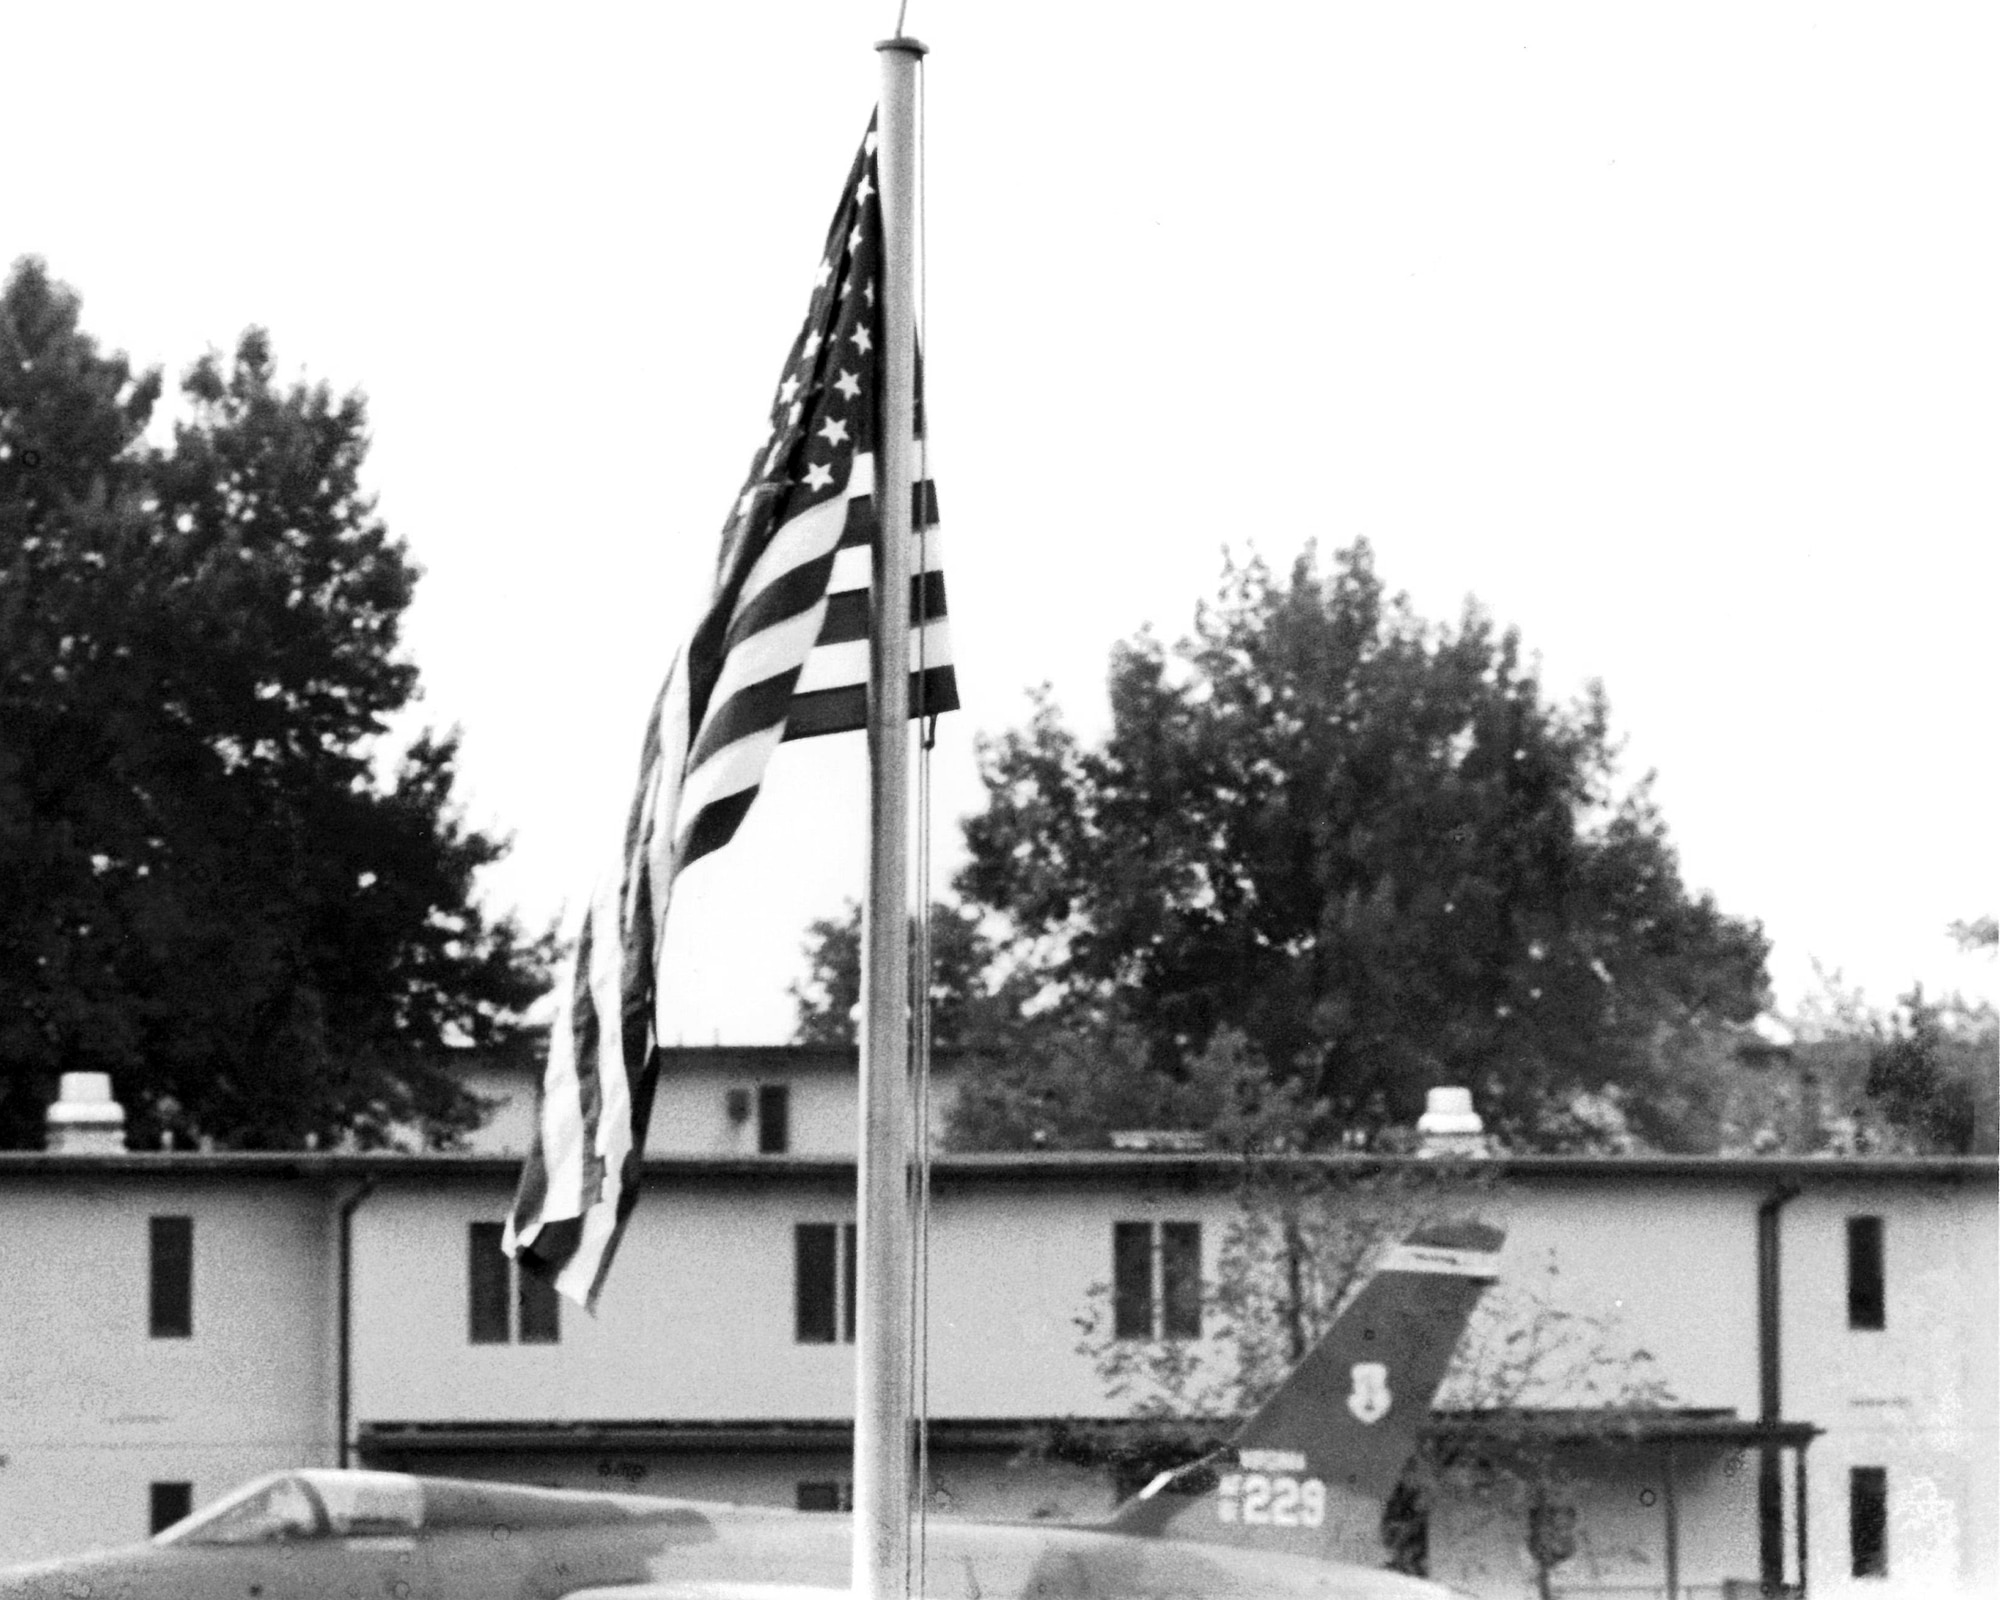 The American flag is flown July 29, 1986, during the first reveille of Air Force NCO academy class 86-3 at the I.G. Brown Training and Education Center in Louisville, Tenn. The event closed a 16-year journey to fly over the capitols of every state and territory in the United States. It was sent out by NCO academy class 71-1. (U.S. Air National Guard file photo/released)  